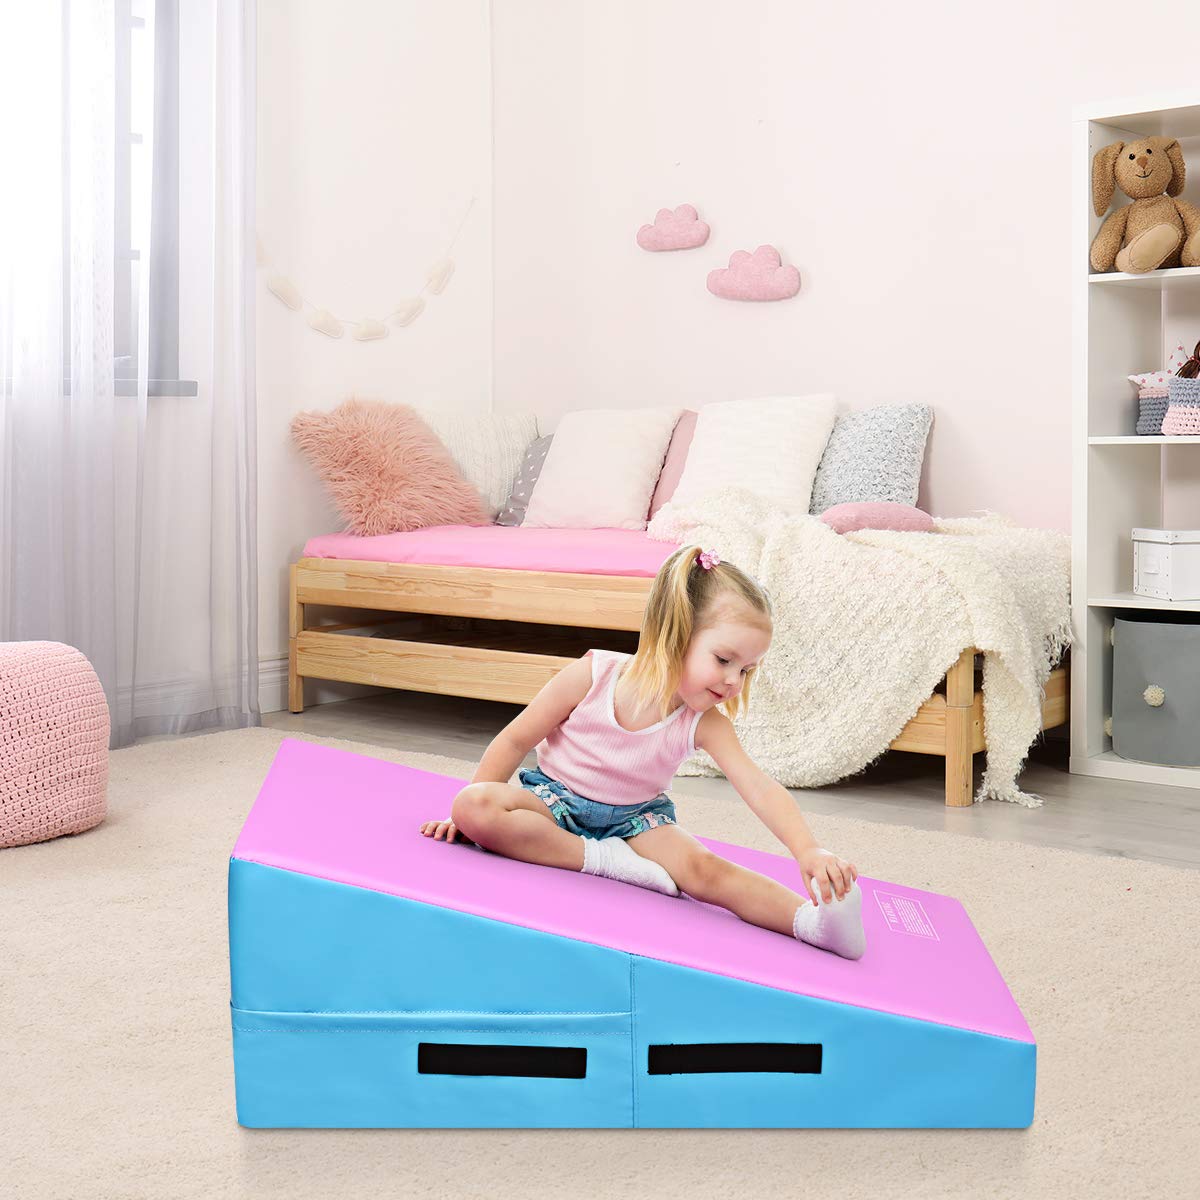 Gymnastics Wedge Mat, Gymnastics for Kids Play (Baby Pink/Baby Blue/Non-Folding)